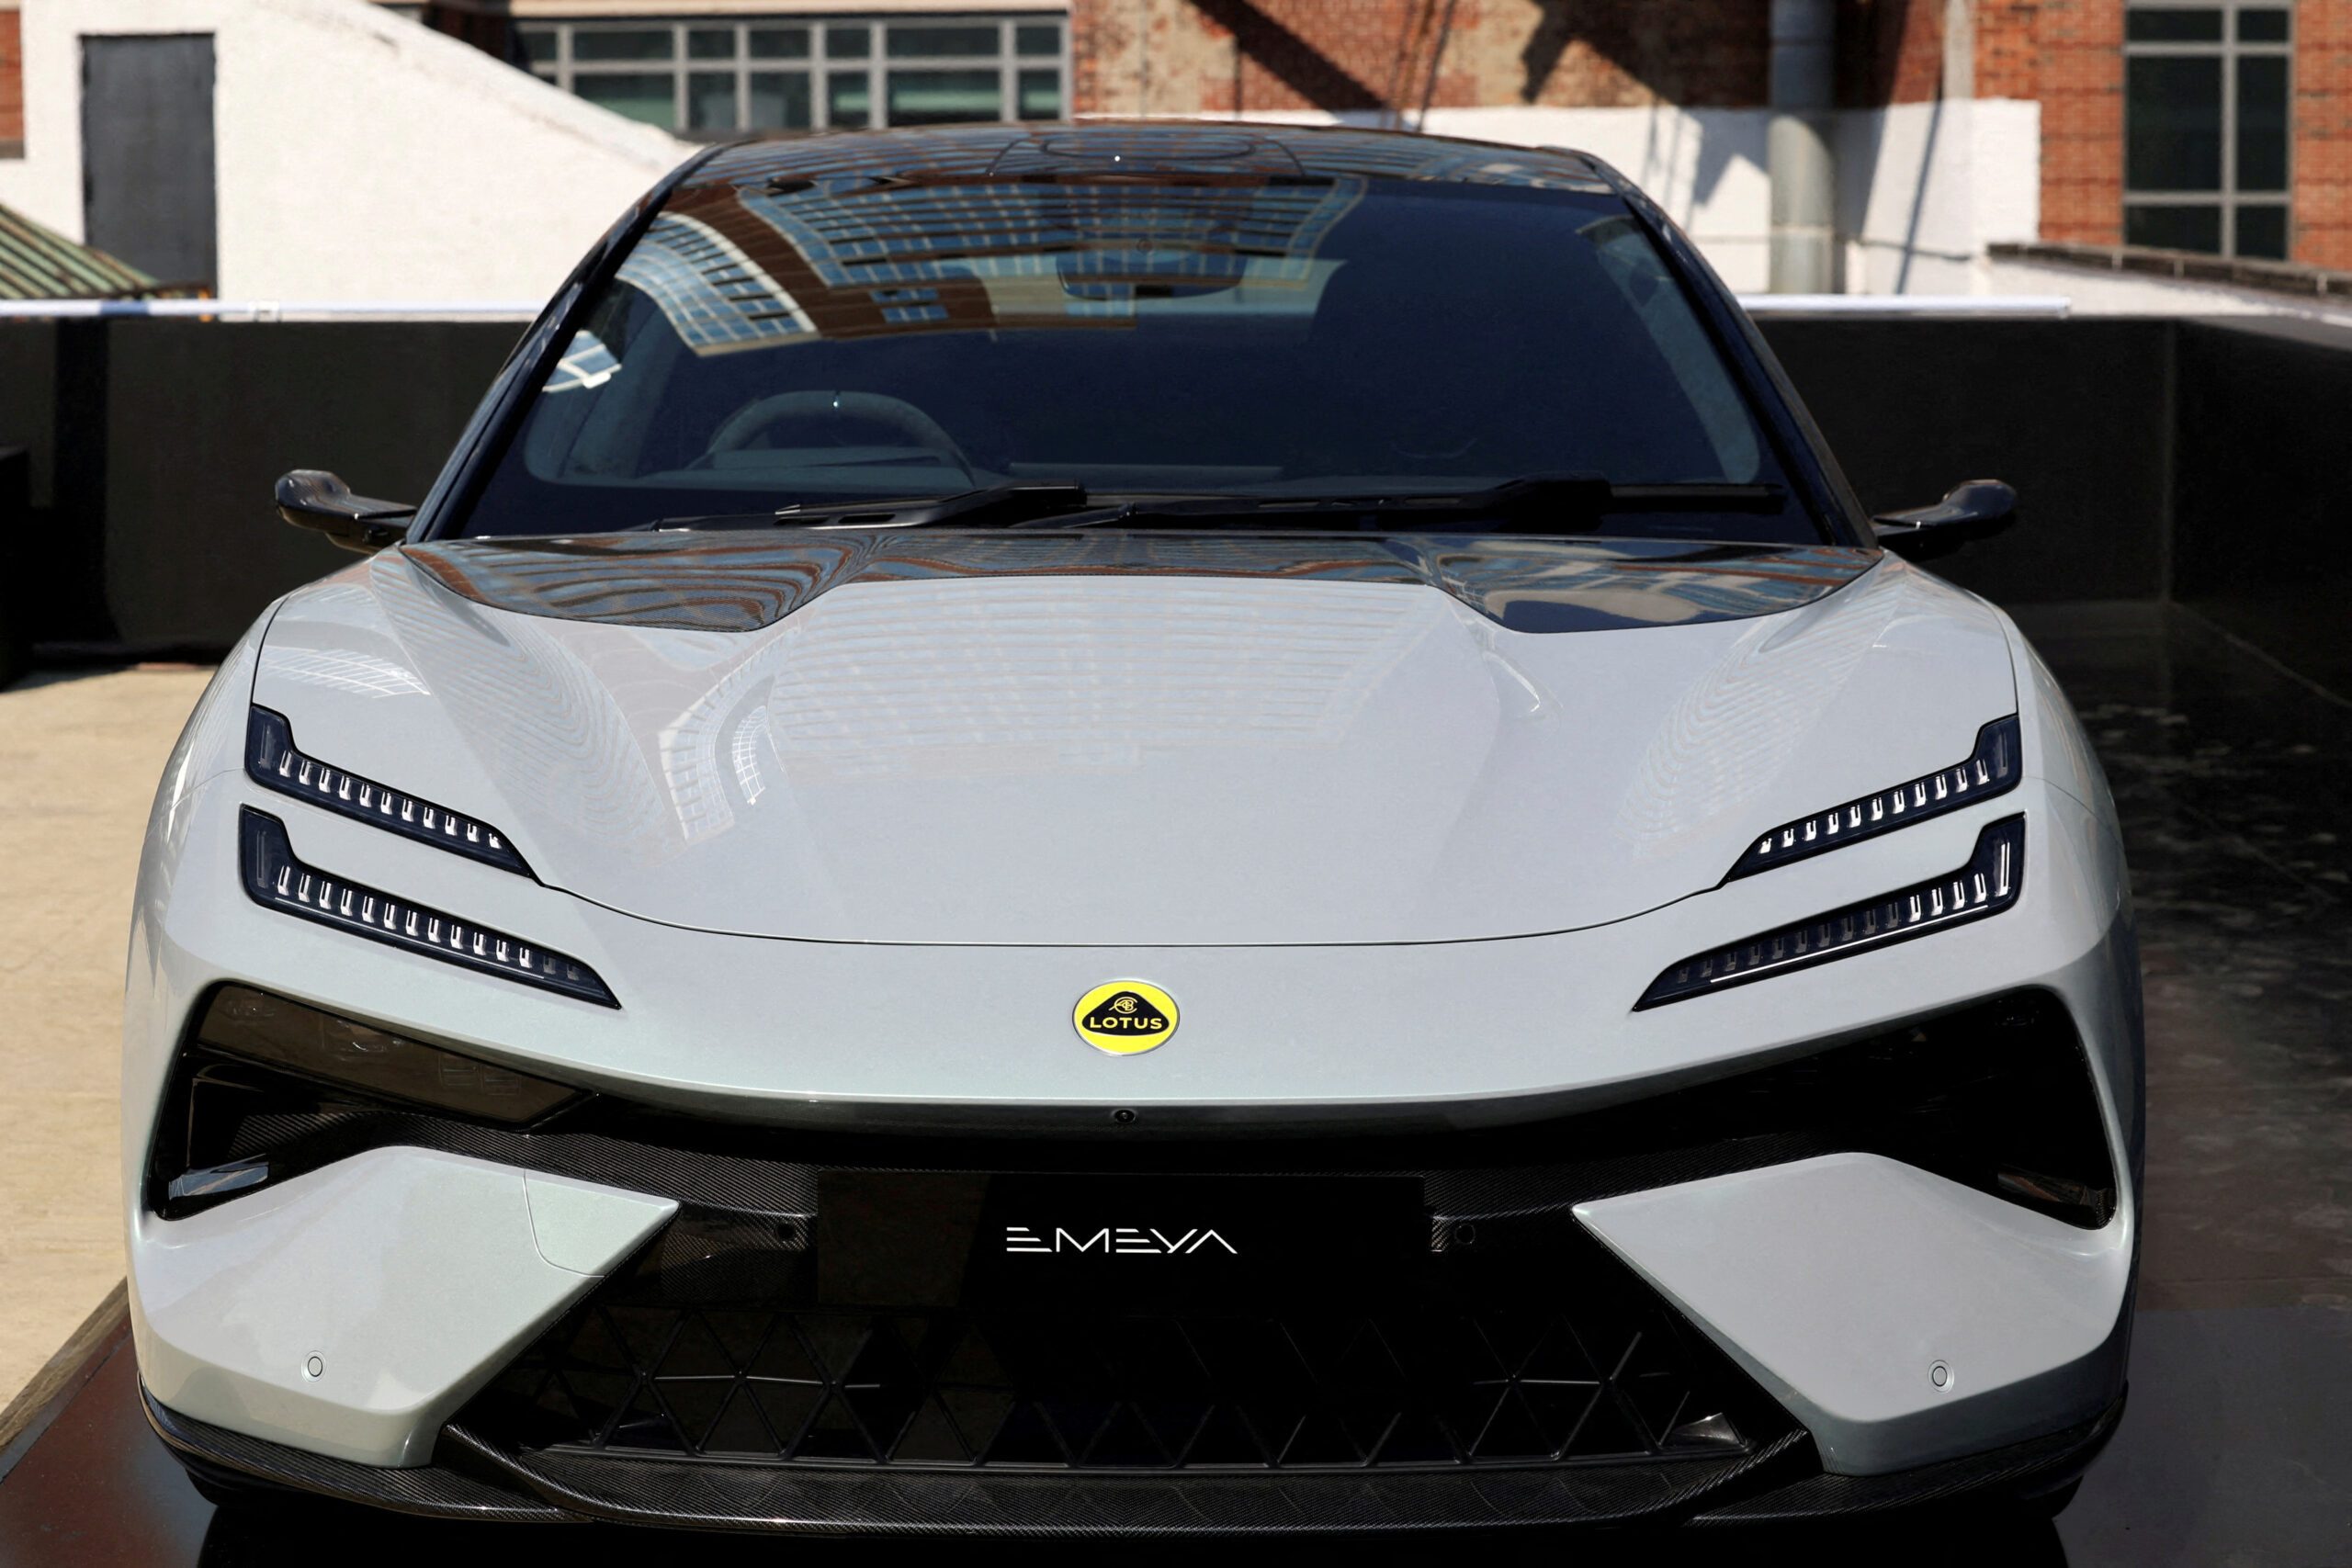 Luxury EV maker Lotus Tech secures $870m ahead of SPAC deal with L Catterton